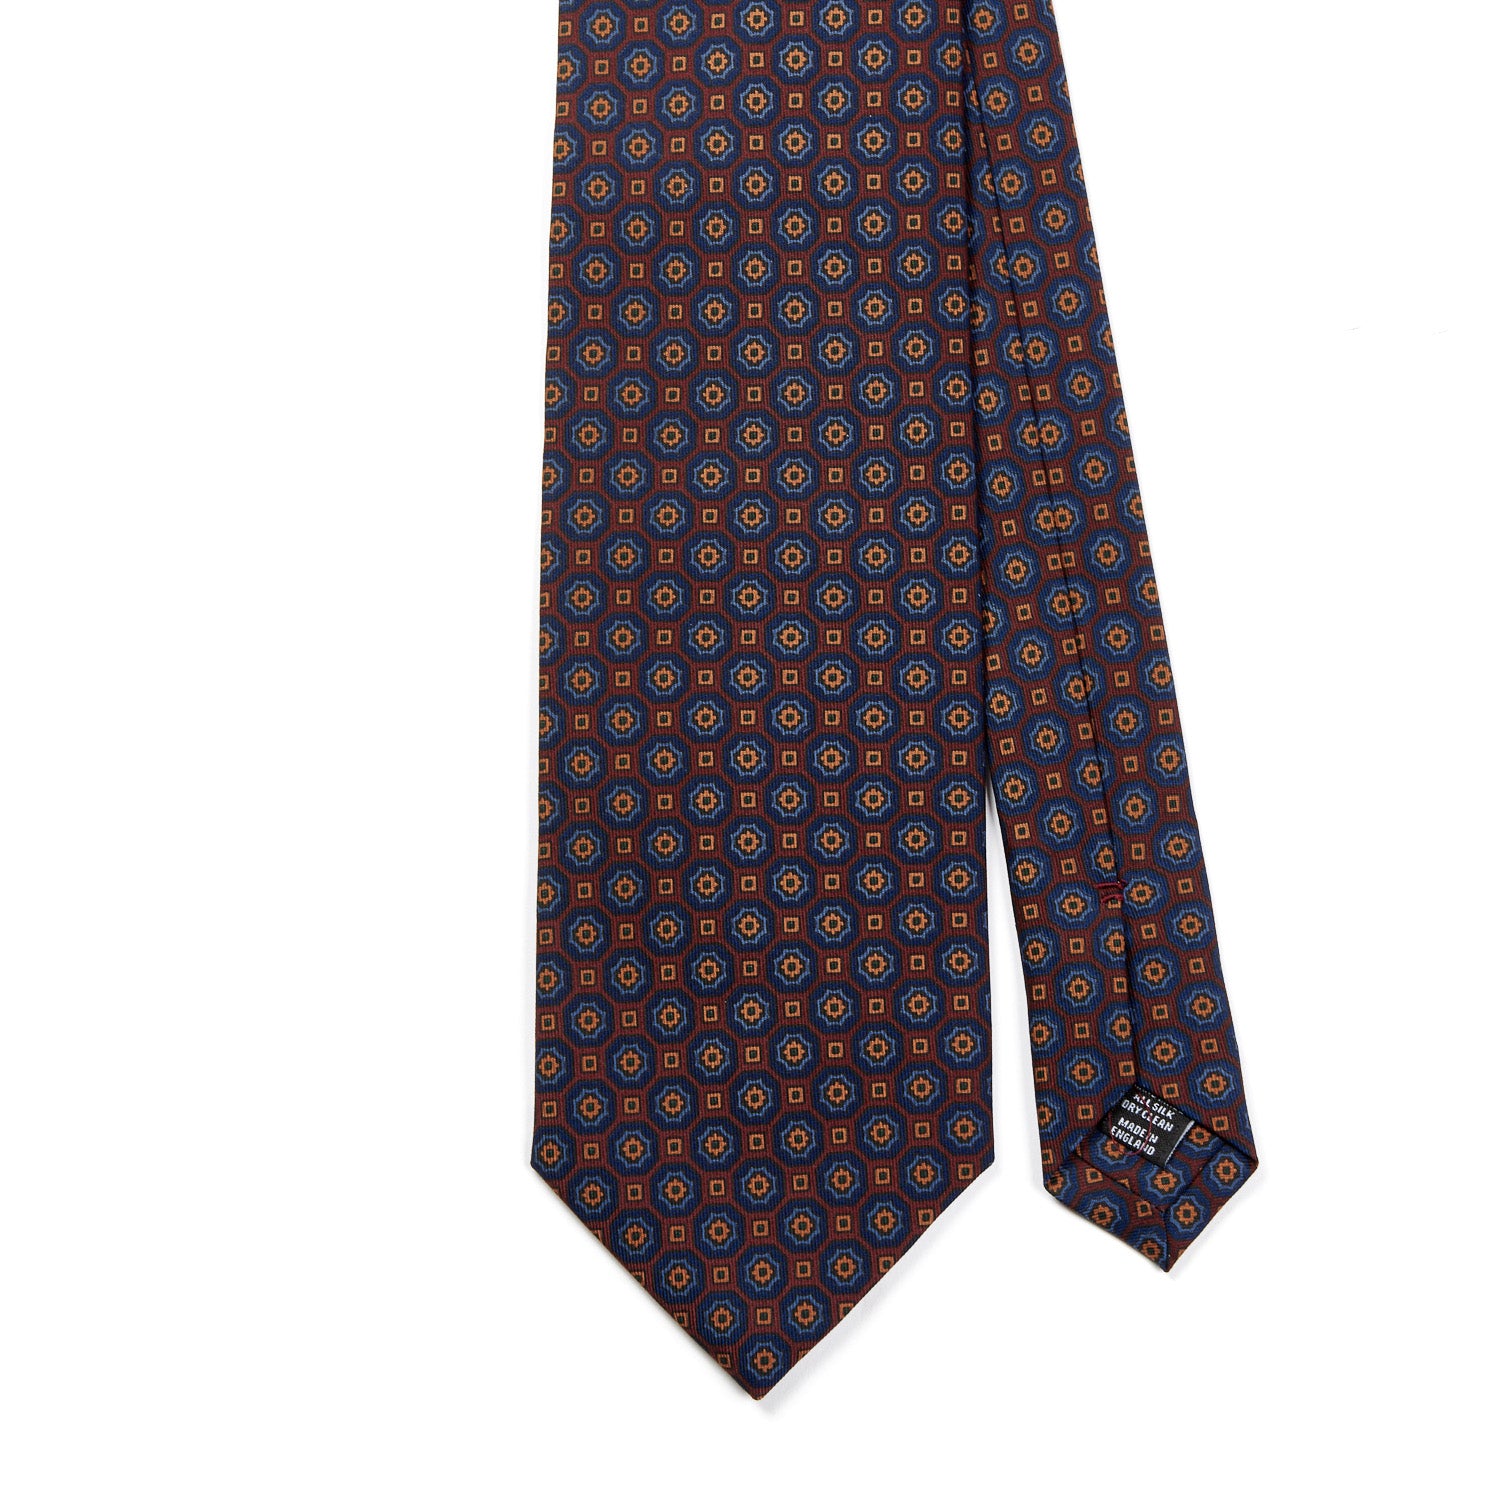 A handmade Sovereign Grade Rust/Blue Floral Medallion Ancient Madder Tie with a polka dot pattern in blue and orange, sold by KirbyAllison.com based in the United Kingdom.